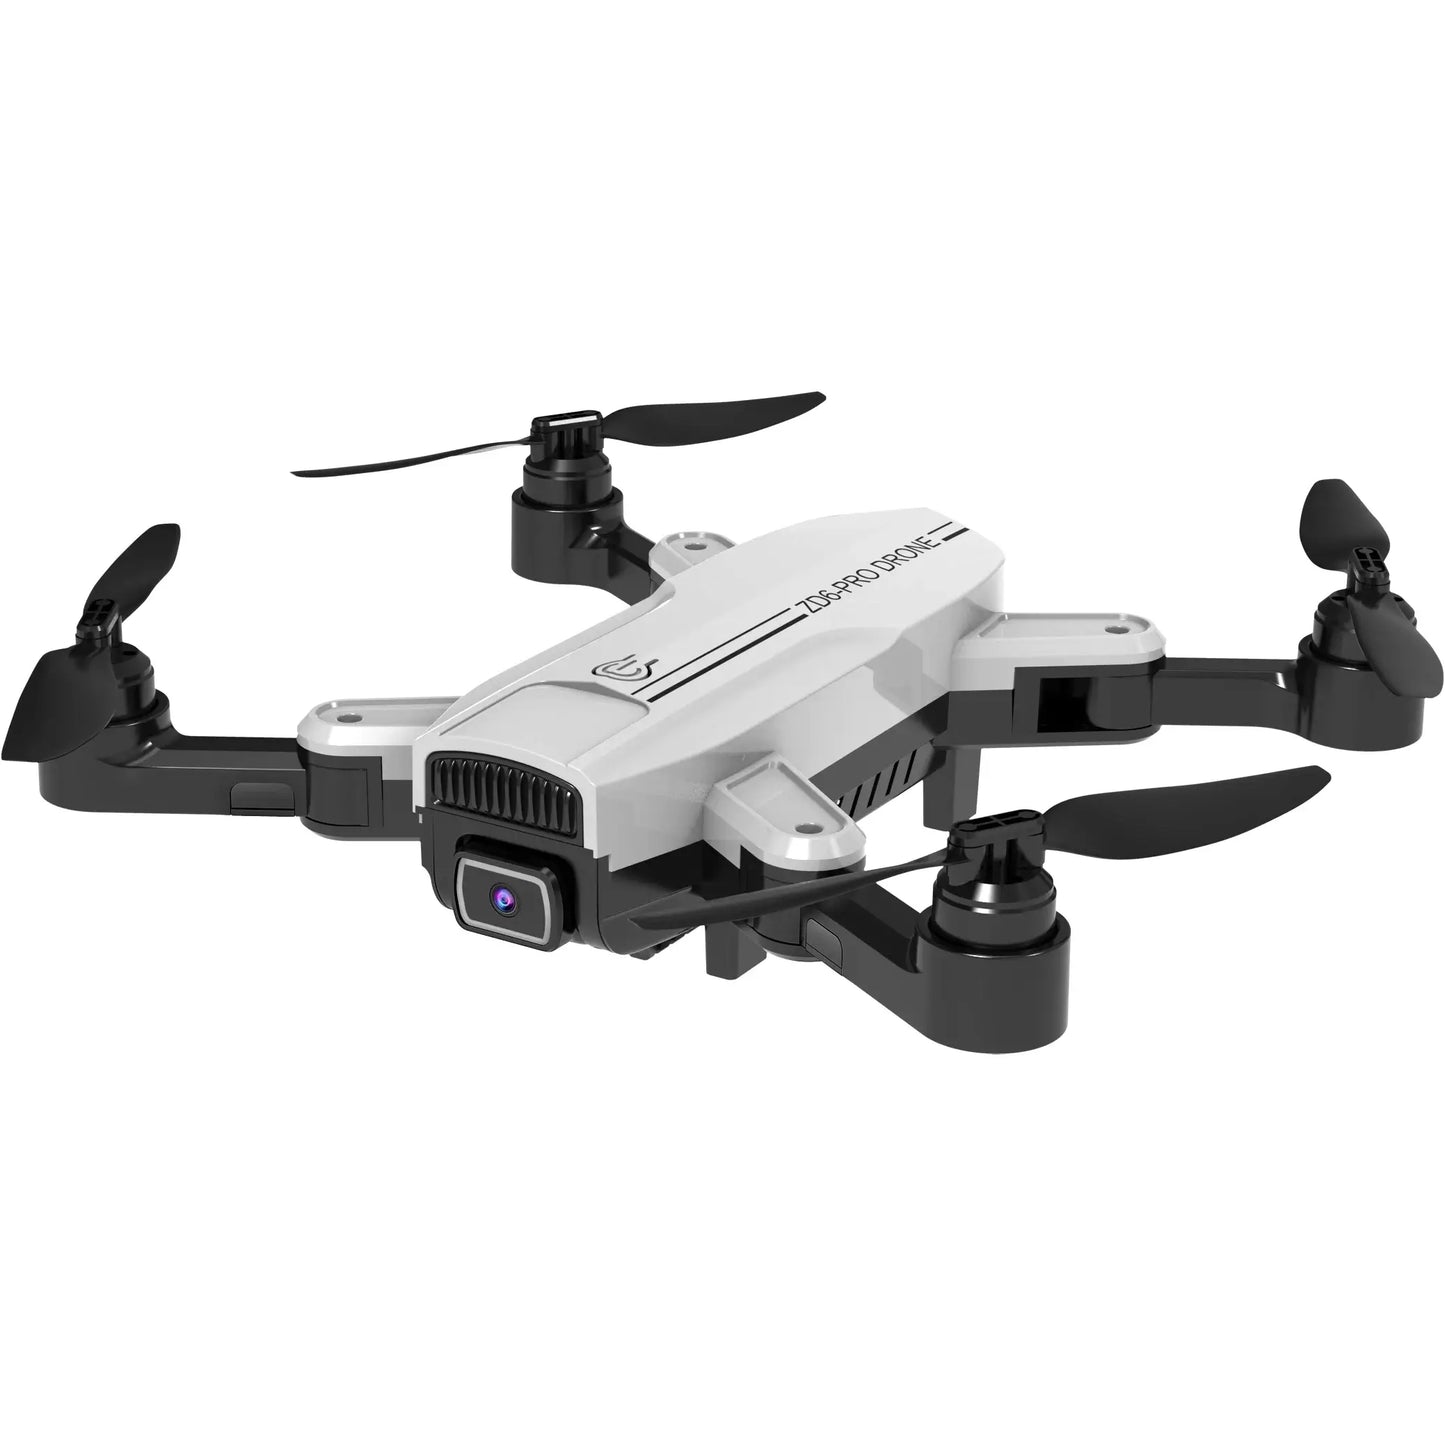 4K camera-equipped drones